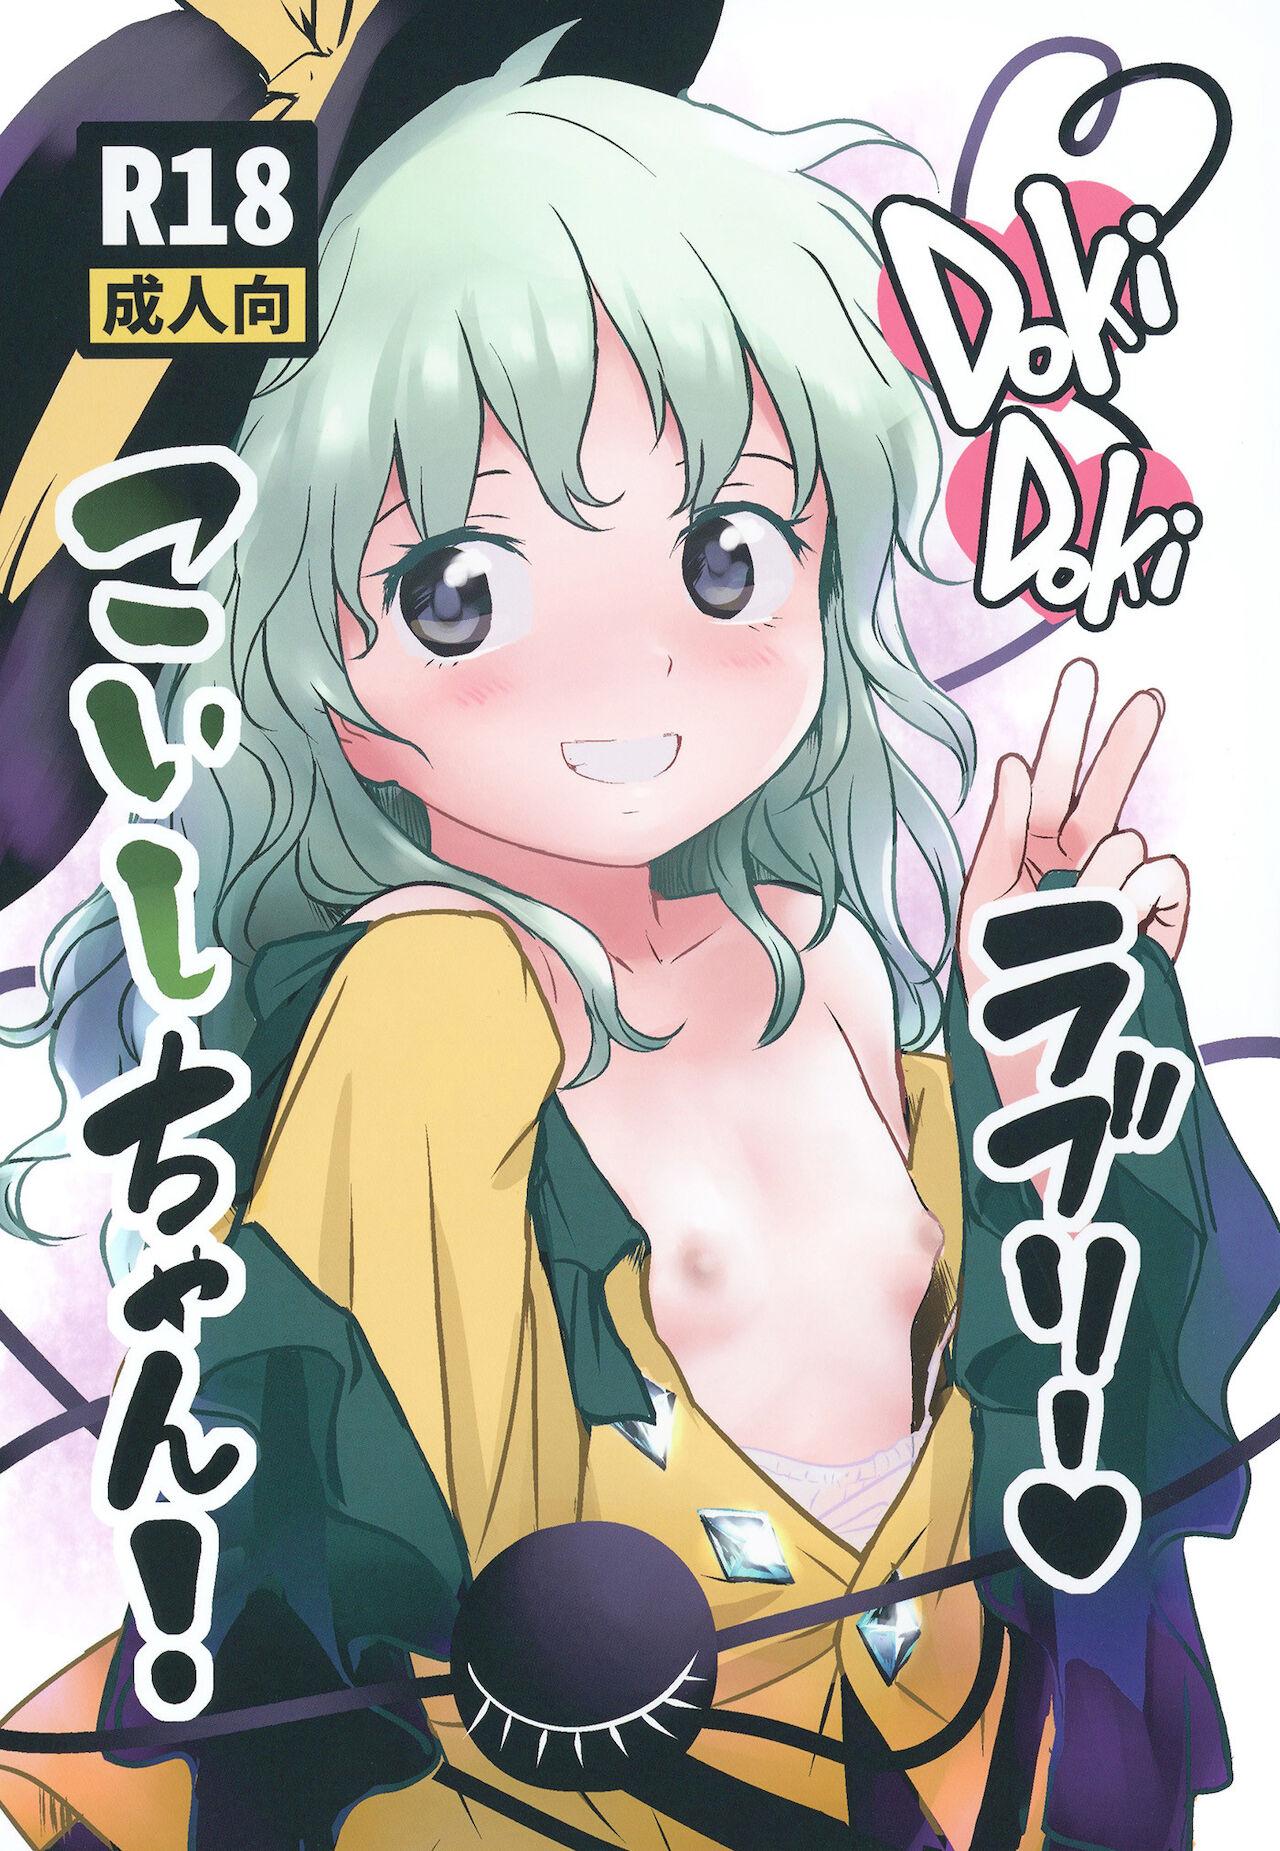 Calle DokiDoki Lovely Koishi-chan! - Touhou project Uncensored - Picture 2